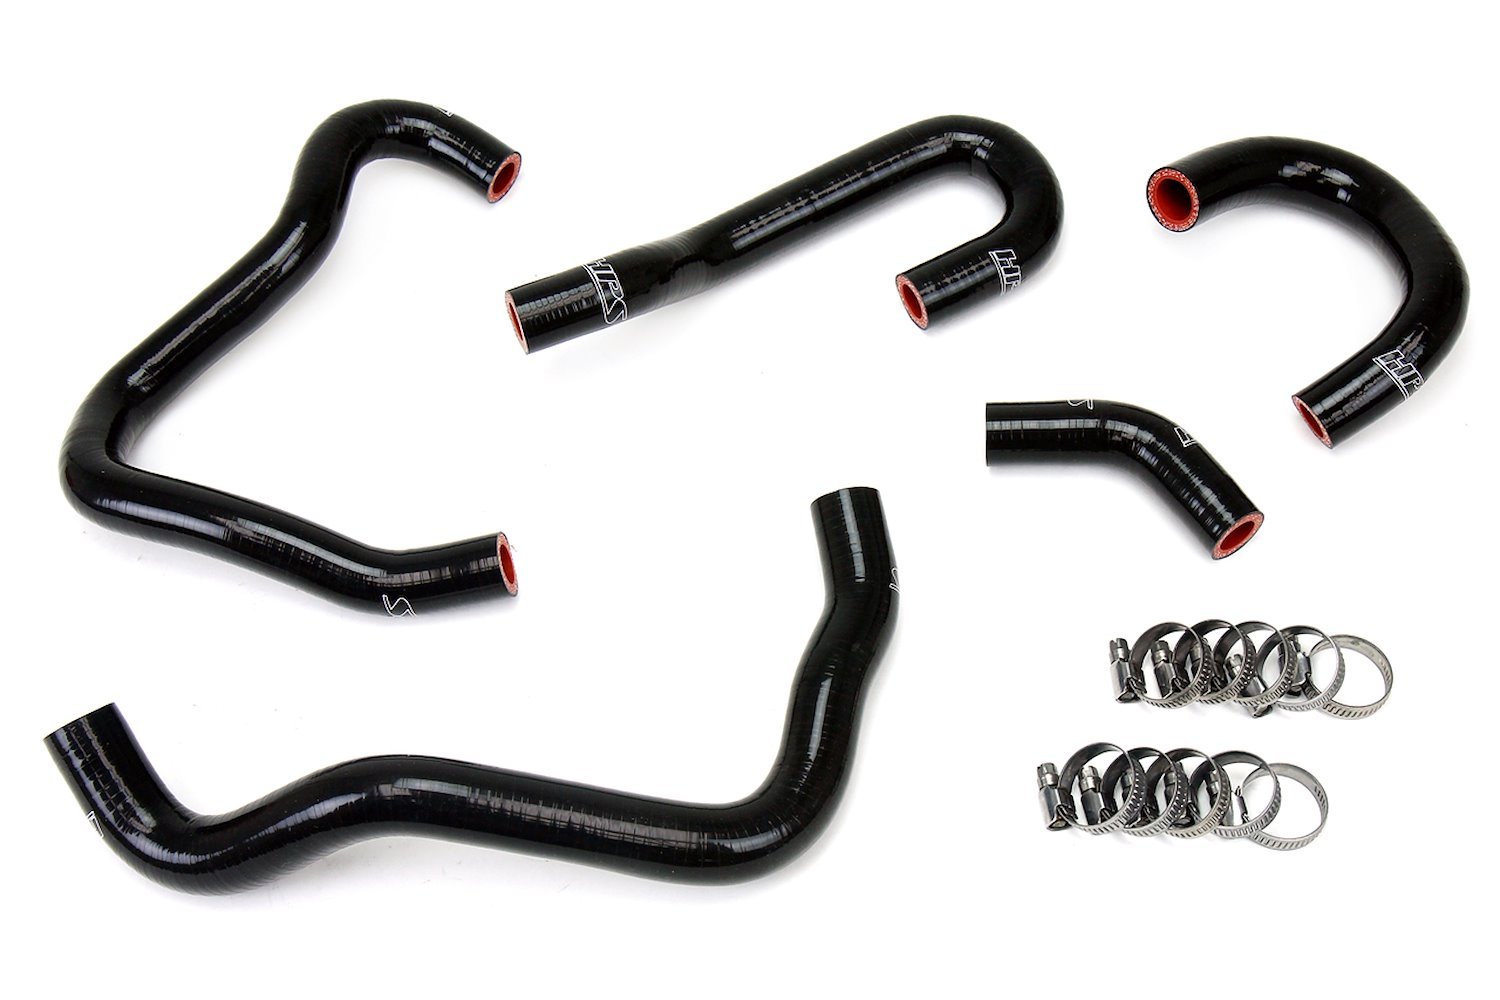 57-1414-BLK Heater Hose Kit, High-Temp 3-Ply Reinforced Silicone, Replace OEM Rubber Heater Coolant Hoses